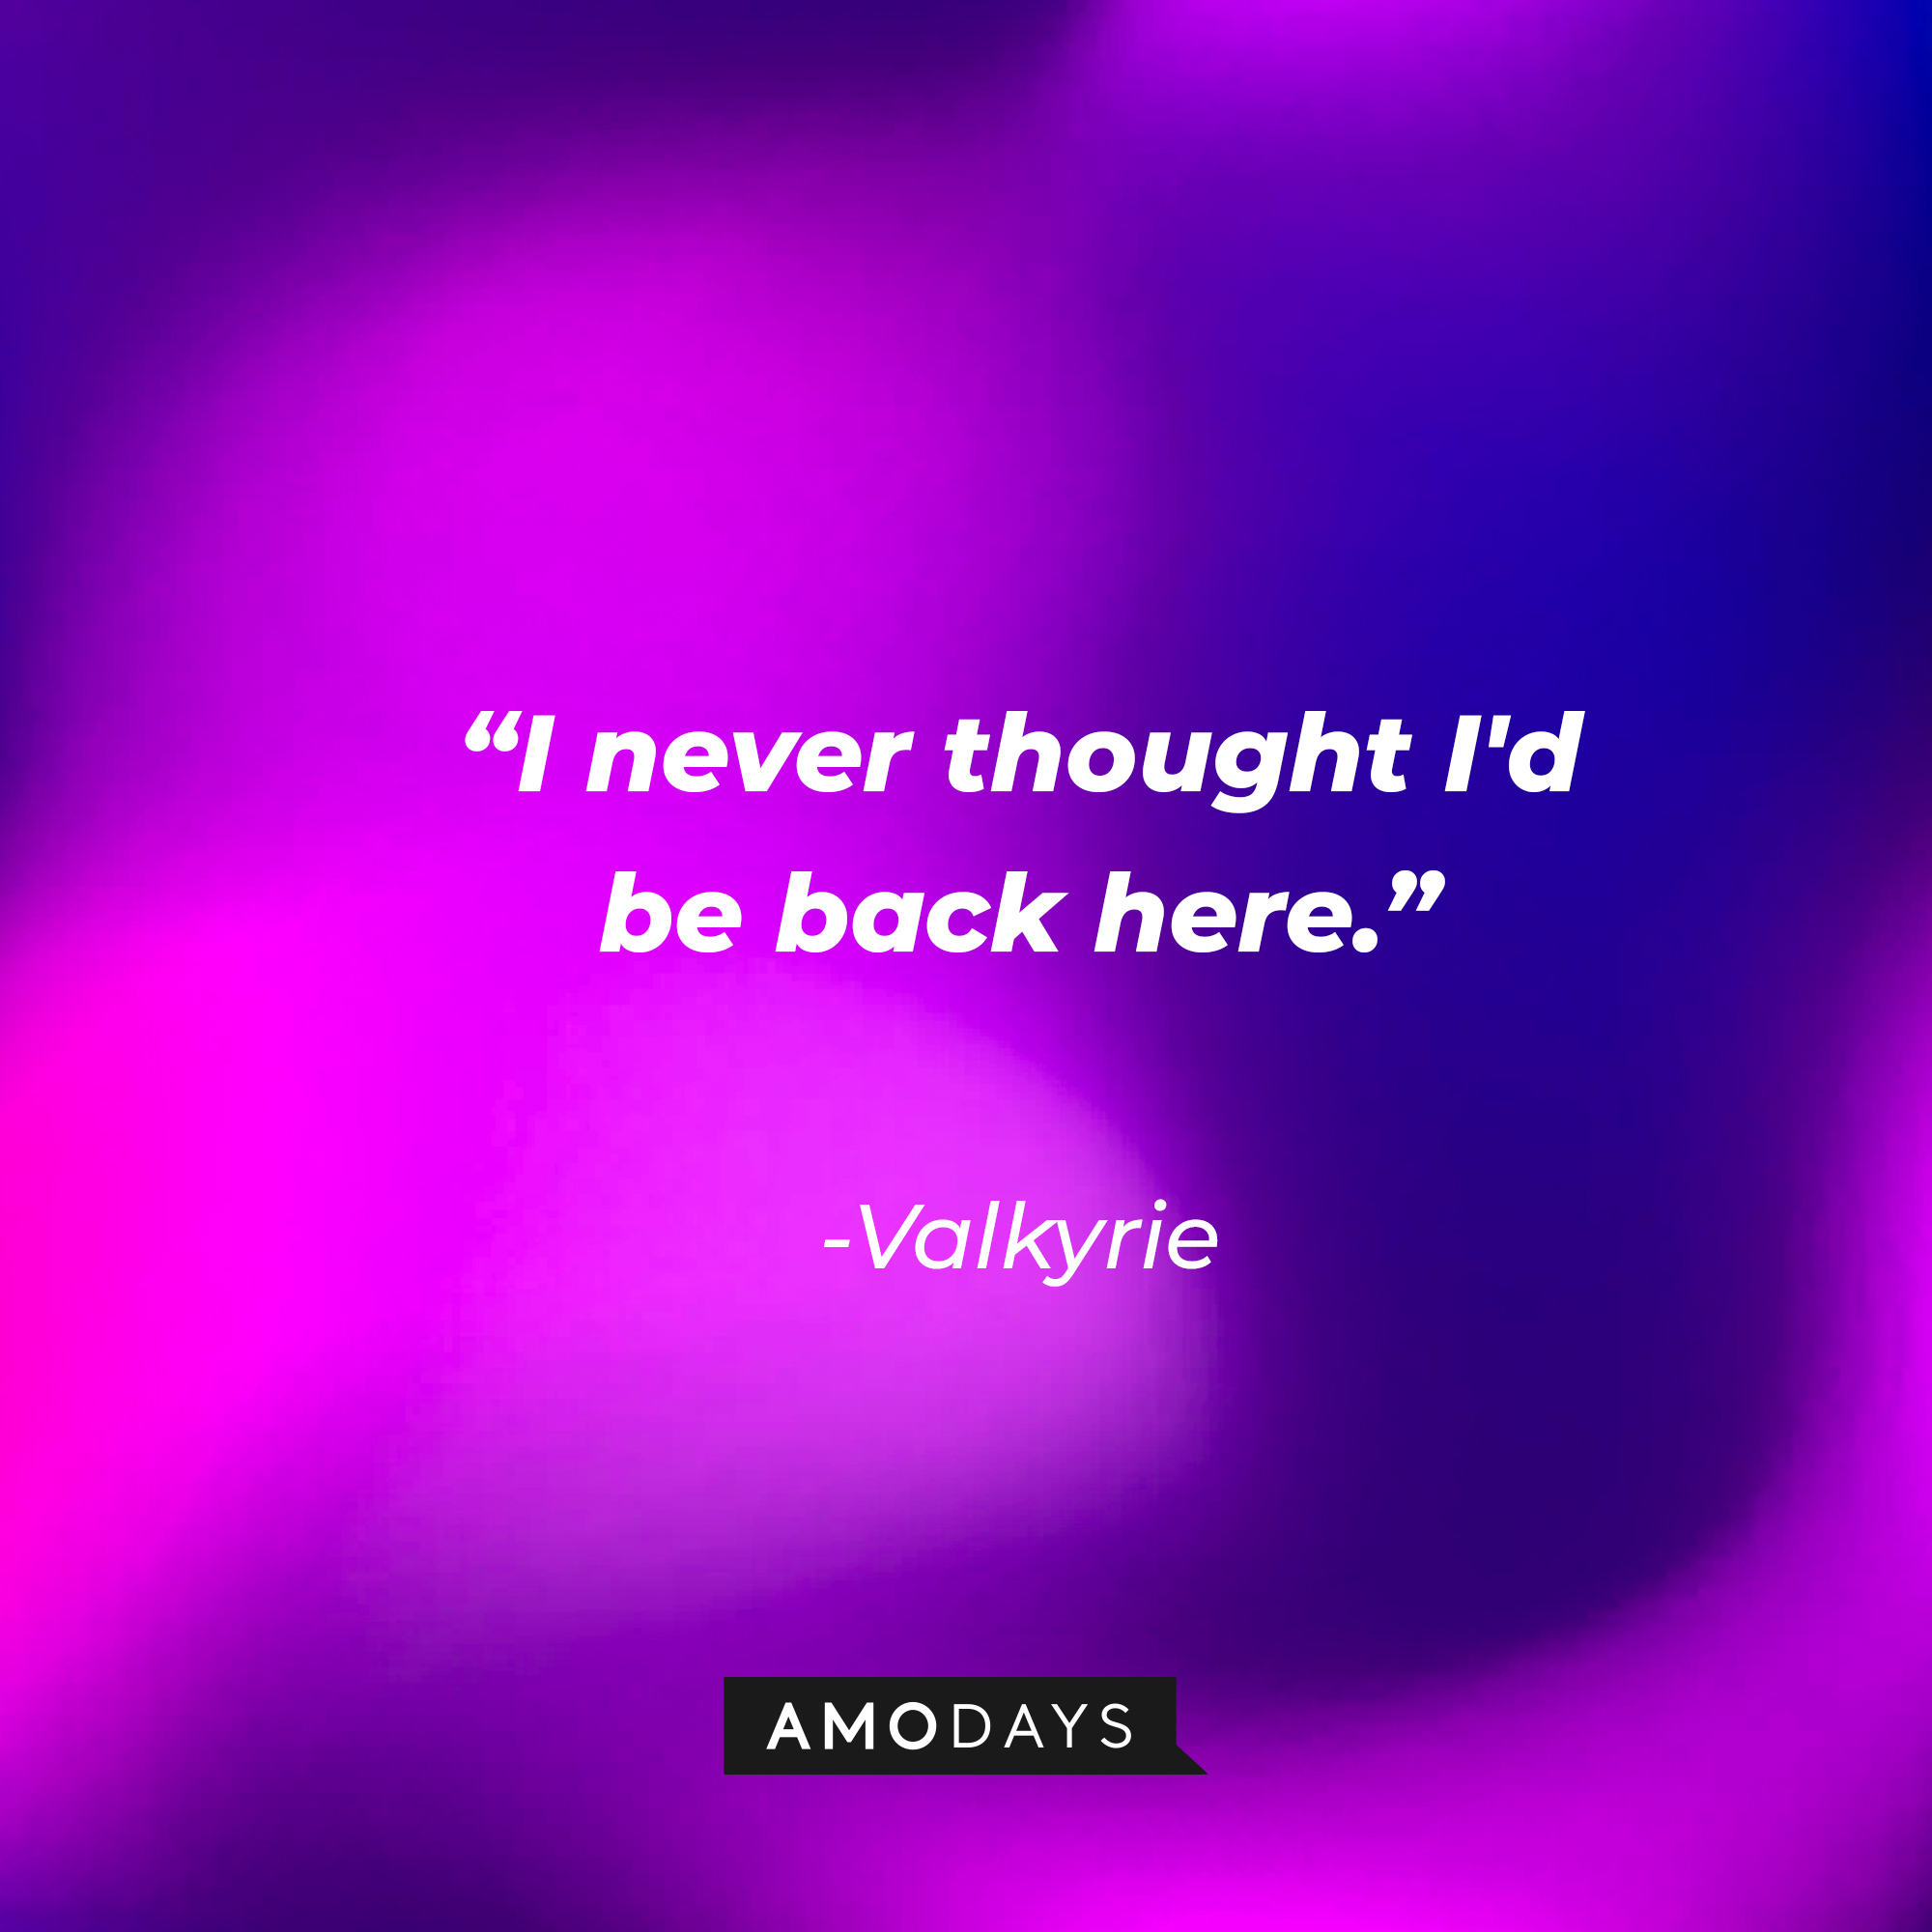 Valkyrie's quote: “I never thought I'd be back here.” | Source: Amodays